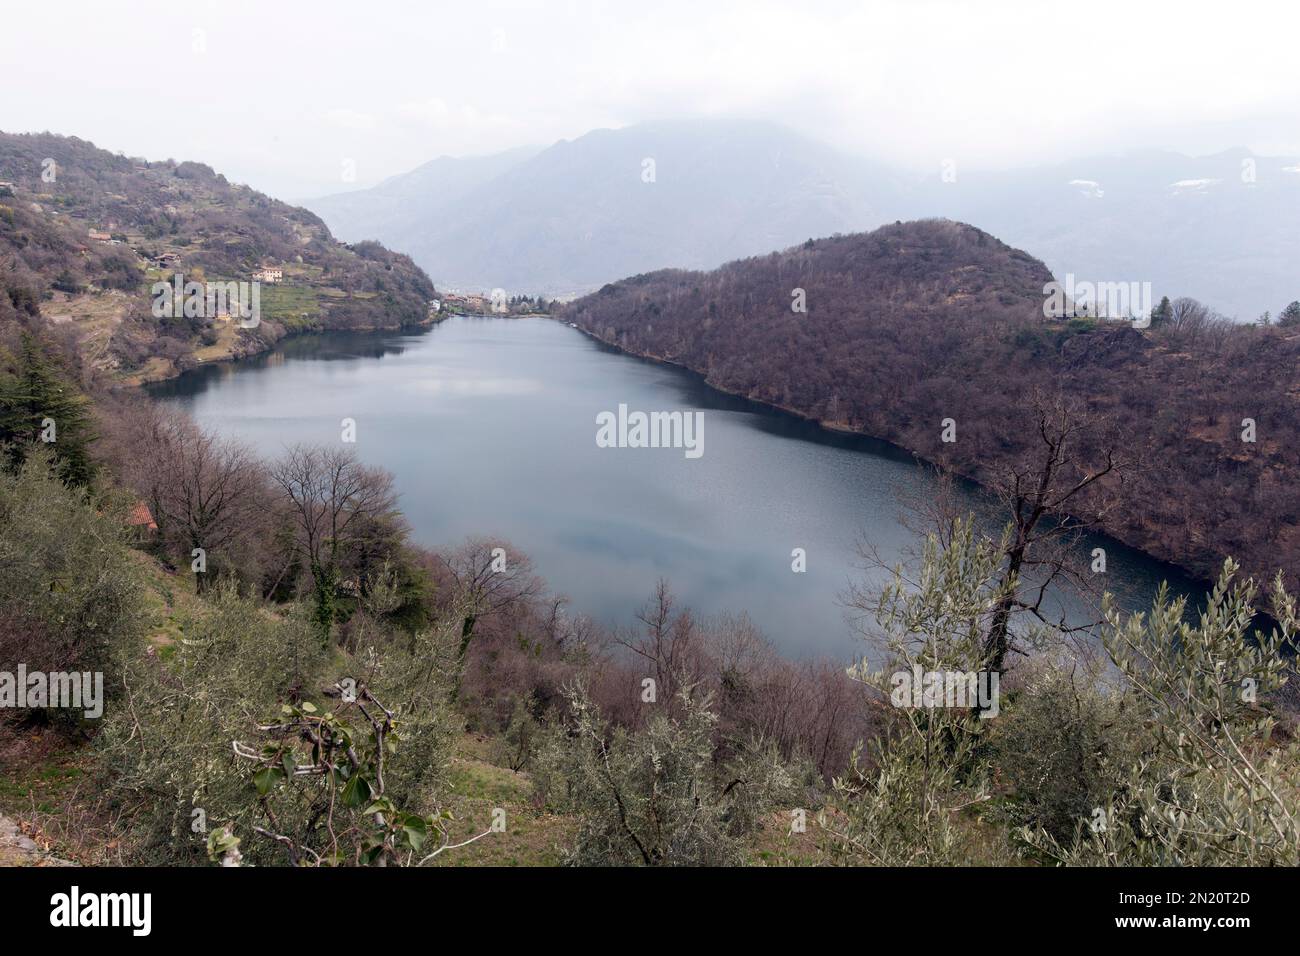 A view of Lake Moro in Valle Camonica, Italy Stock Photo